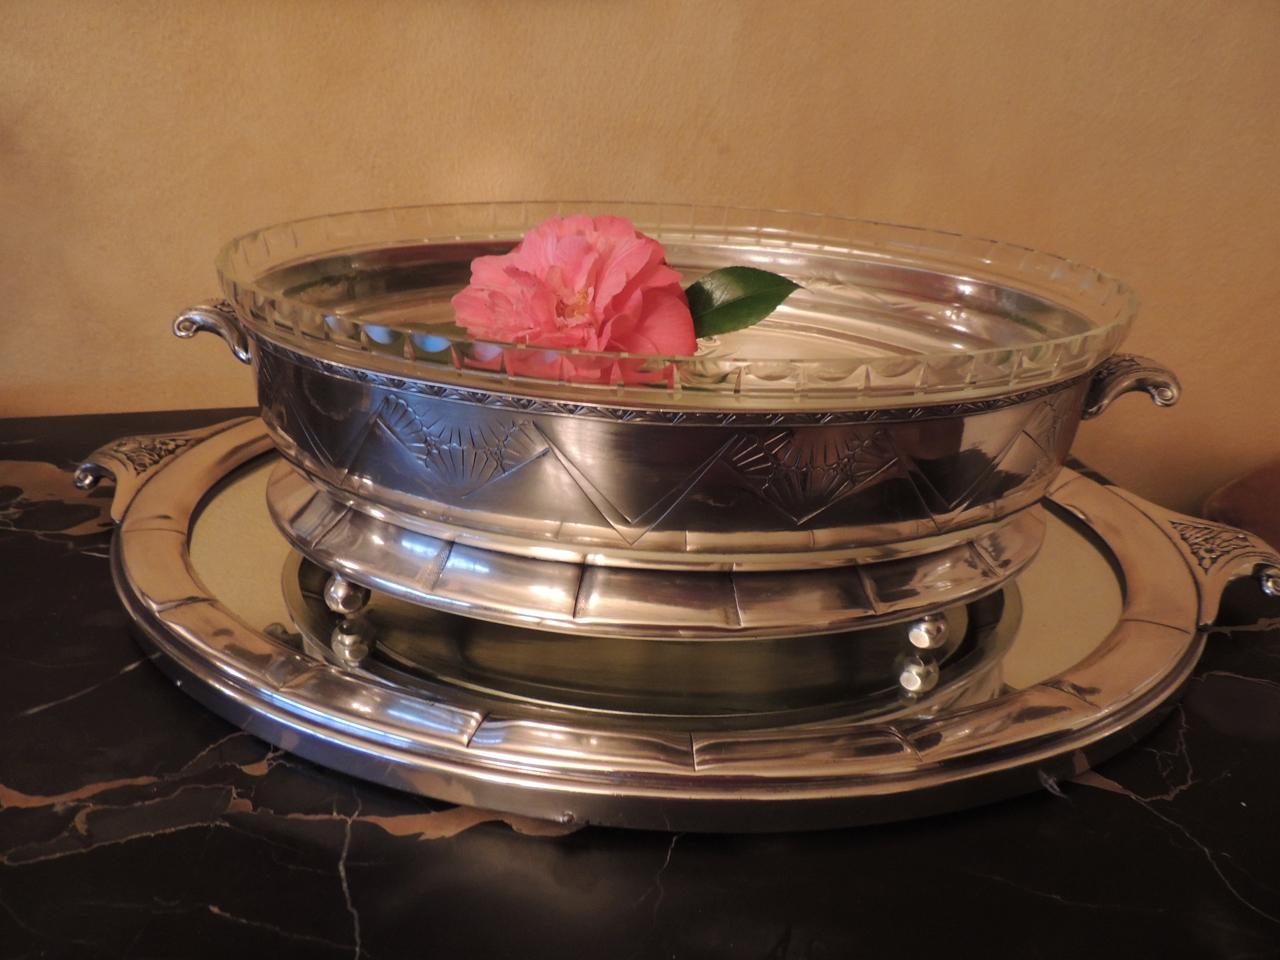 mirrored trays for centerpieces